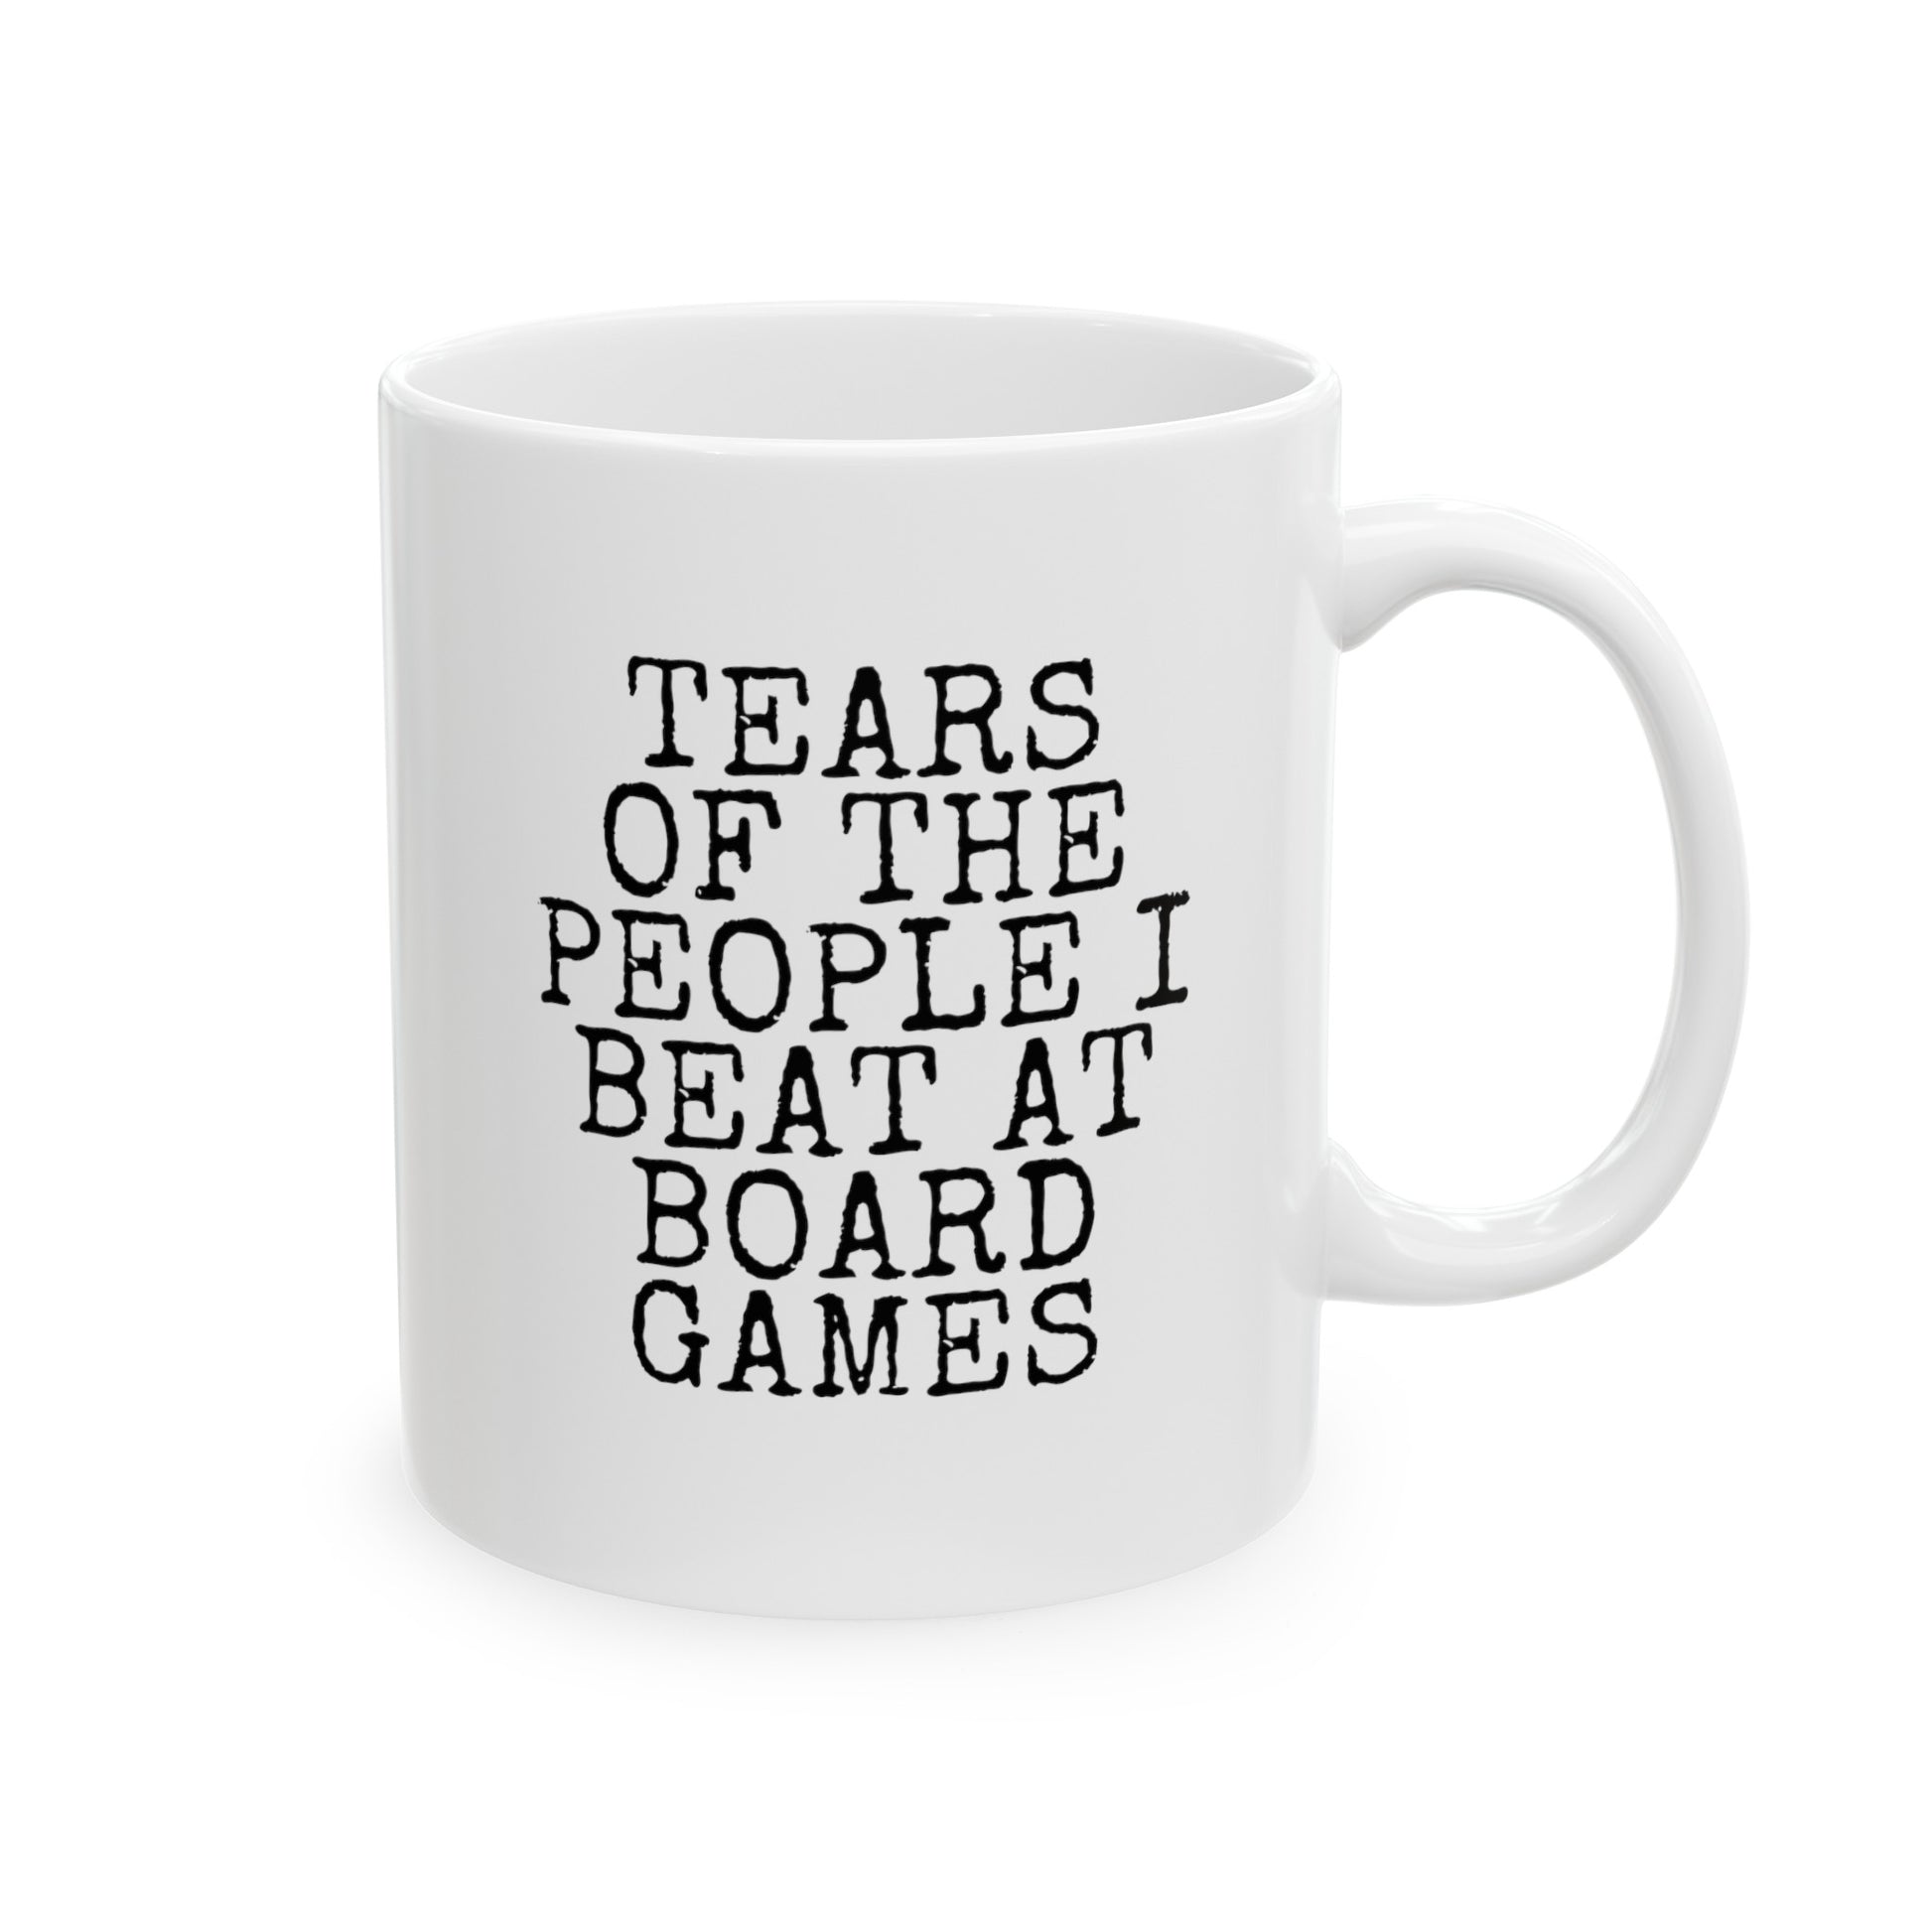 Tears Of The People I Beat At Board Games 11oz white funny large coffee mug gift for friends player him her quote waveywares wavey wares wavywares wavy wares